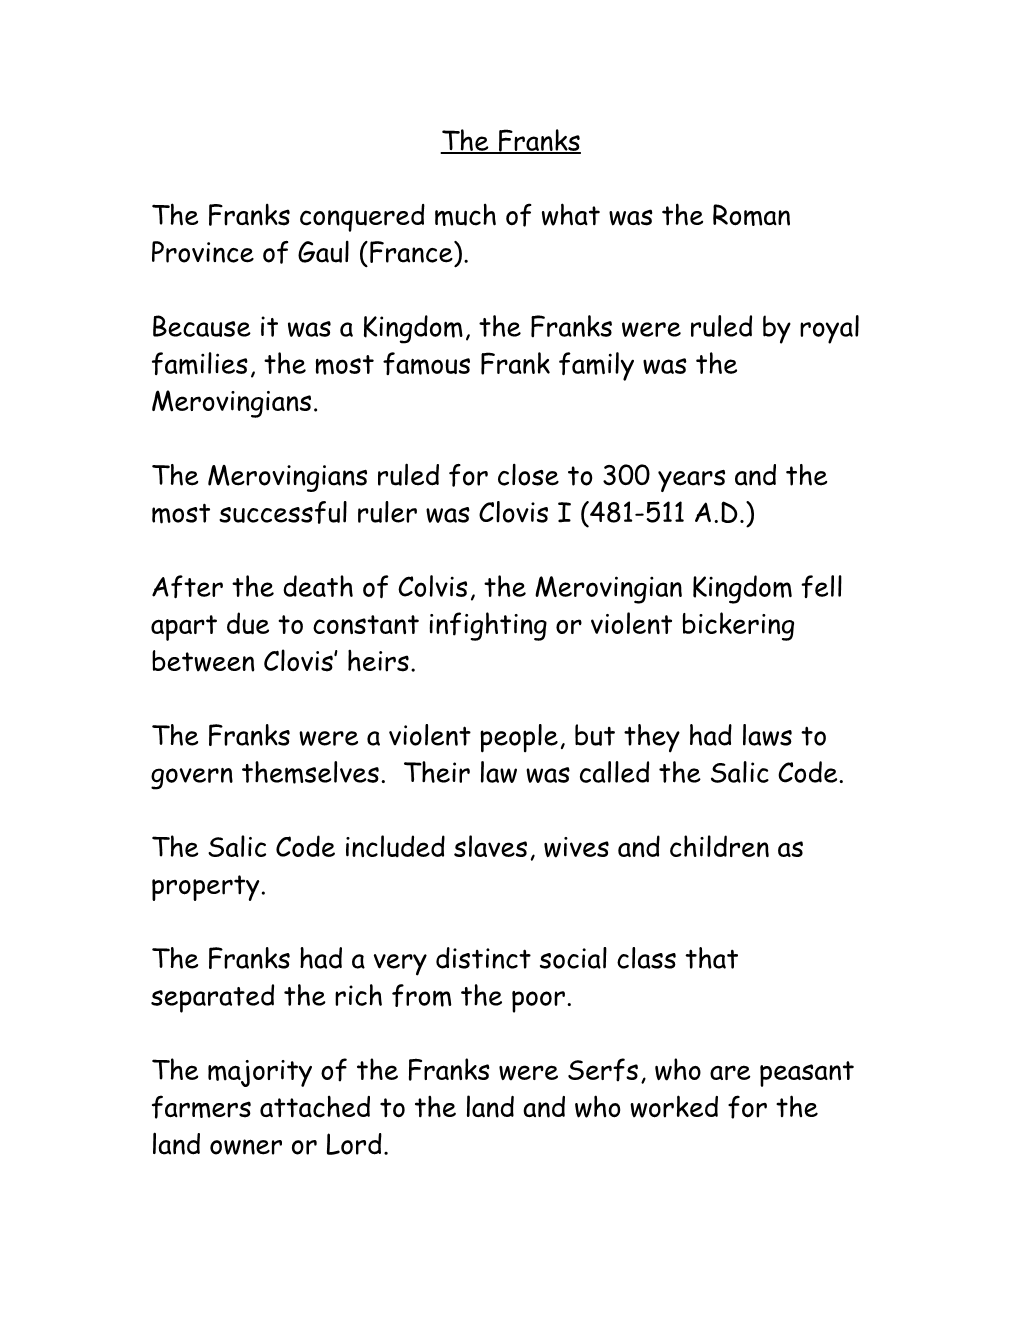 The Franks Conquered Much of What Was the Roman Province of Gaul (France)